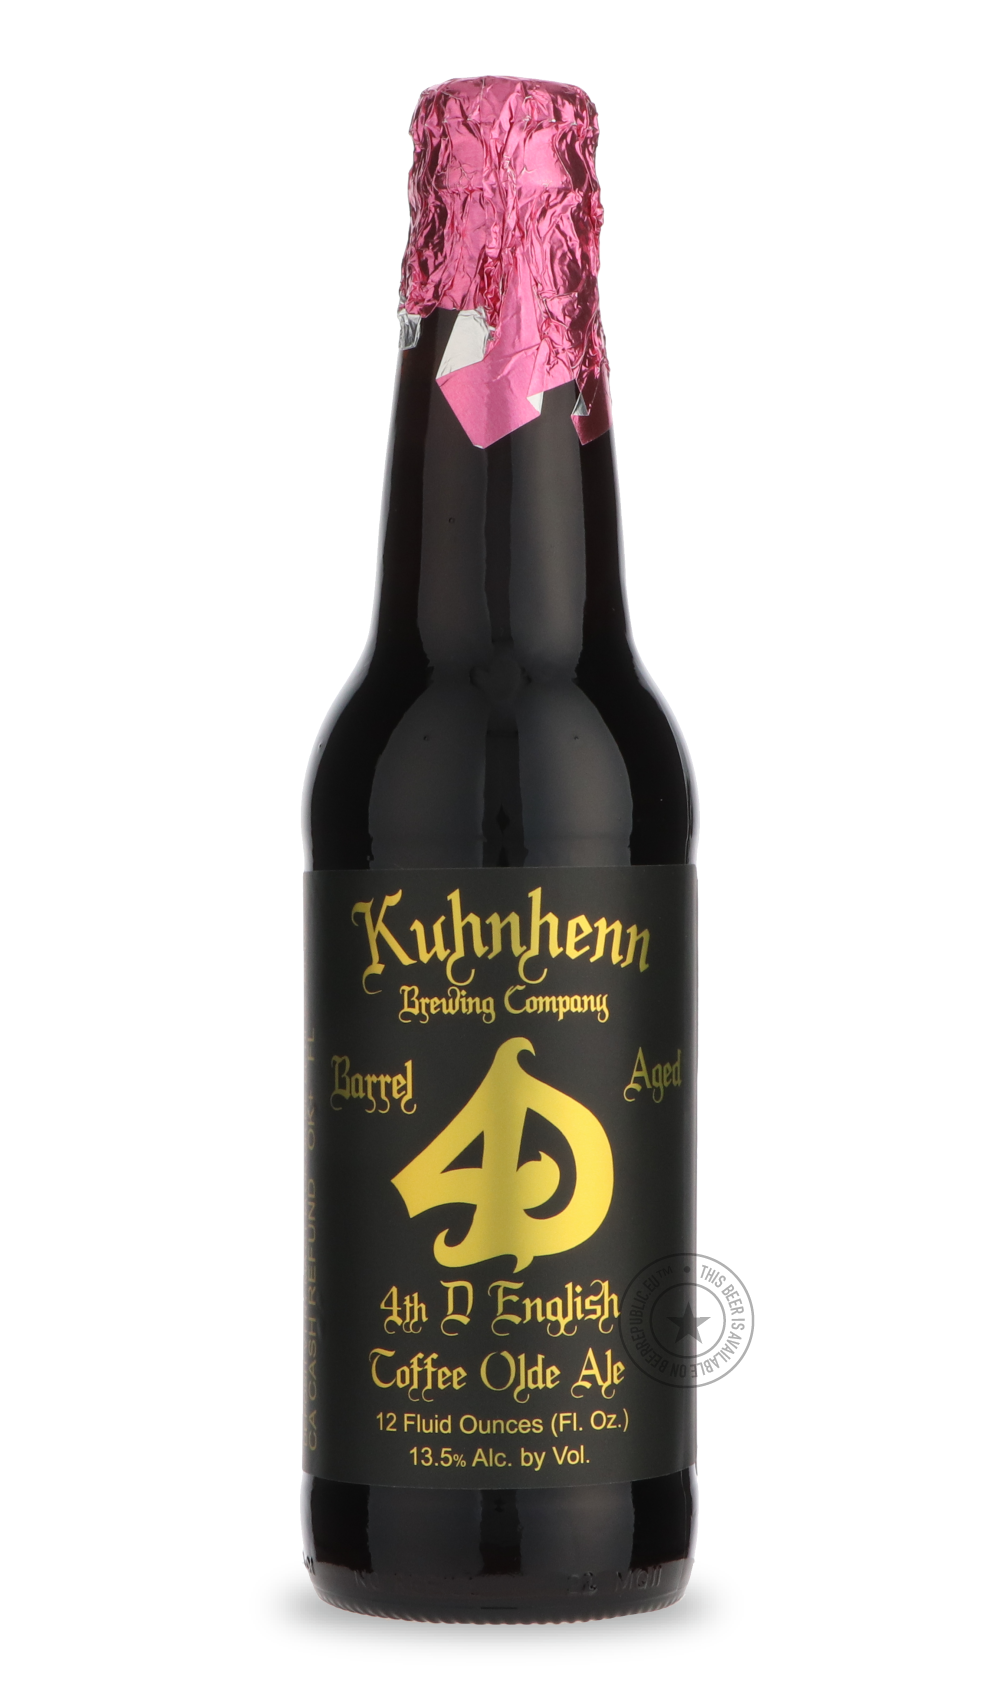 -Kuhnhenn- Bourbon Barrel Aged Toffee 4D-Brown & Dark- Only @ Beer Republic - The best online beer store for American & Canadian craft beer - Buy beer online from the USA and Canada - Bier online kopen - Amerikaans bier kopen - Craft beer store - Craft beer kopen - Amerikanisch bier kaufen - Bier online kaufen - Acheter biere online - IPA - Stout - Porter - New England IPA - Hazy IPA - Imperial Stout - Barrel Aged - Barrel Aged Imperial Stout - Brown - Dark beer - Blond - Blonde - Pilsner - Lager - Wheat - 